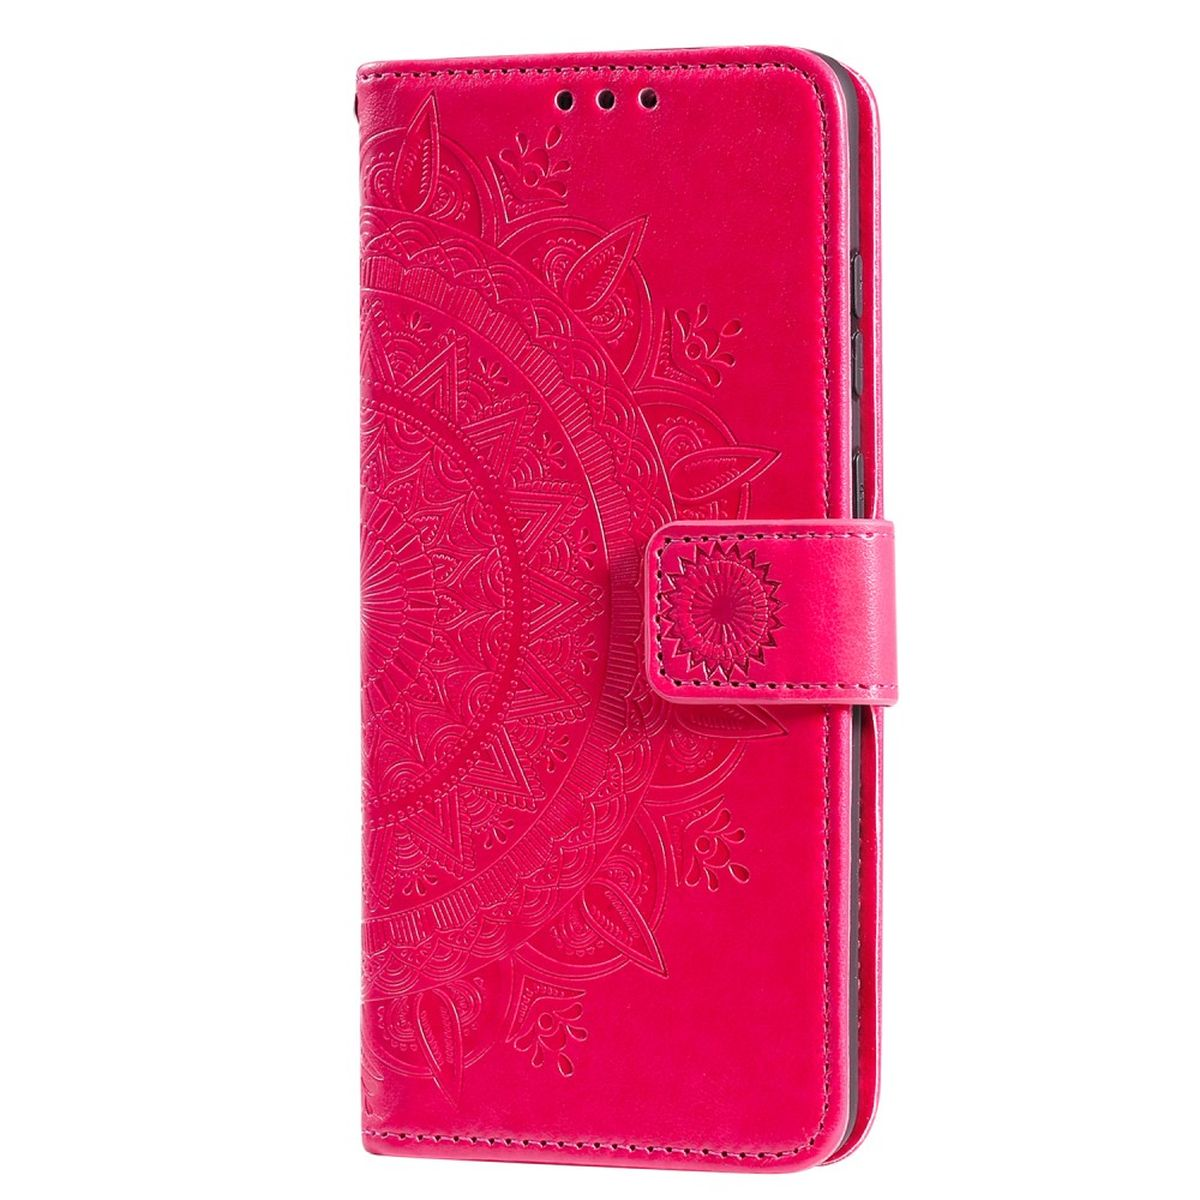 Mandala mit Bookcover, 5G, Muster, A33 COVERKINGZ Galaxy Samsung, Pink Klapphülle